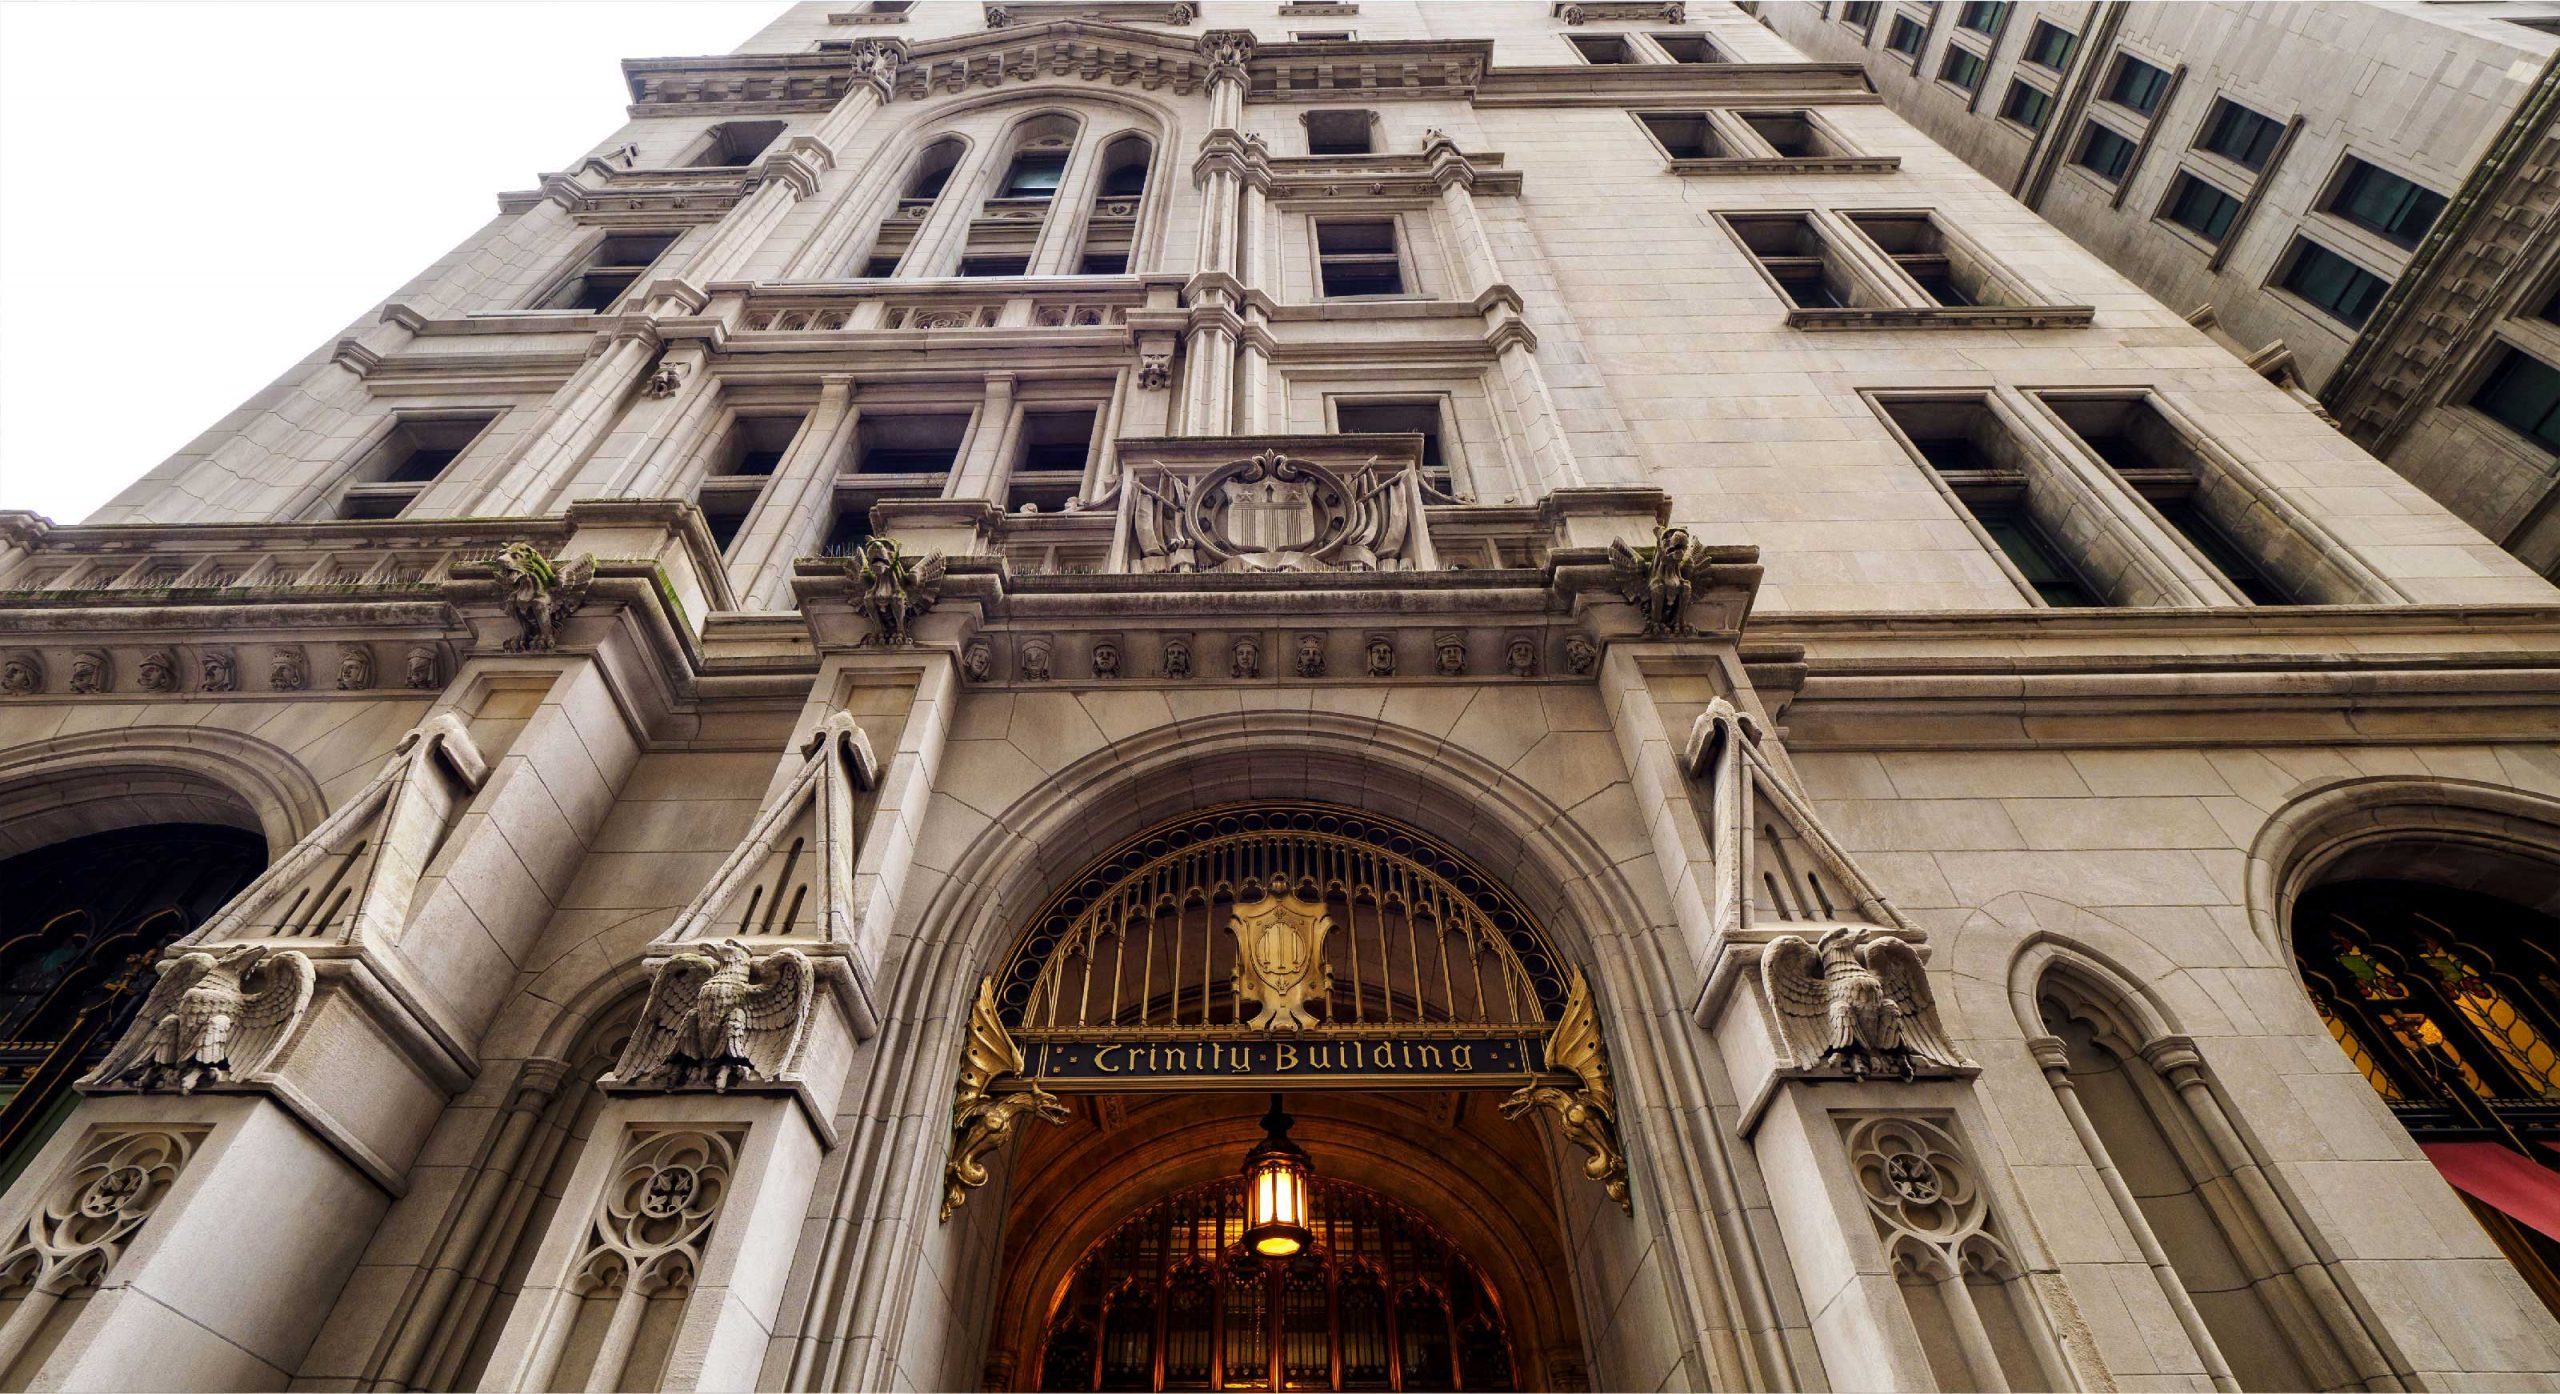 Entrance to Sky Dental NYC, the best dentist in FiDi NYC. The Trinity Building is gothic, built with sandstone blocks. Gargoyles, dragons, etc. flank the grand, golden entrance.